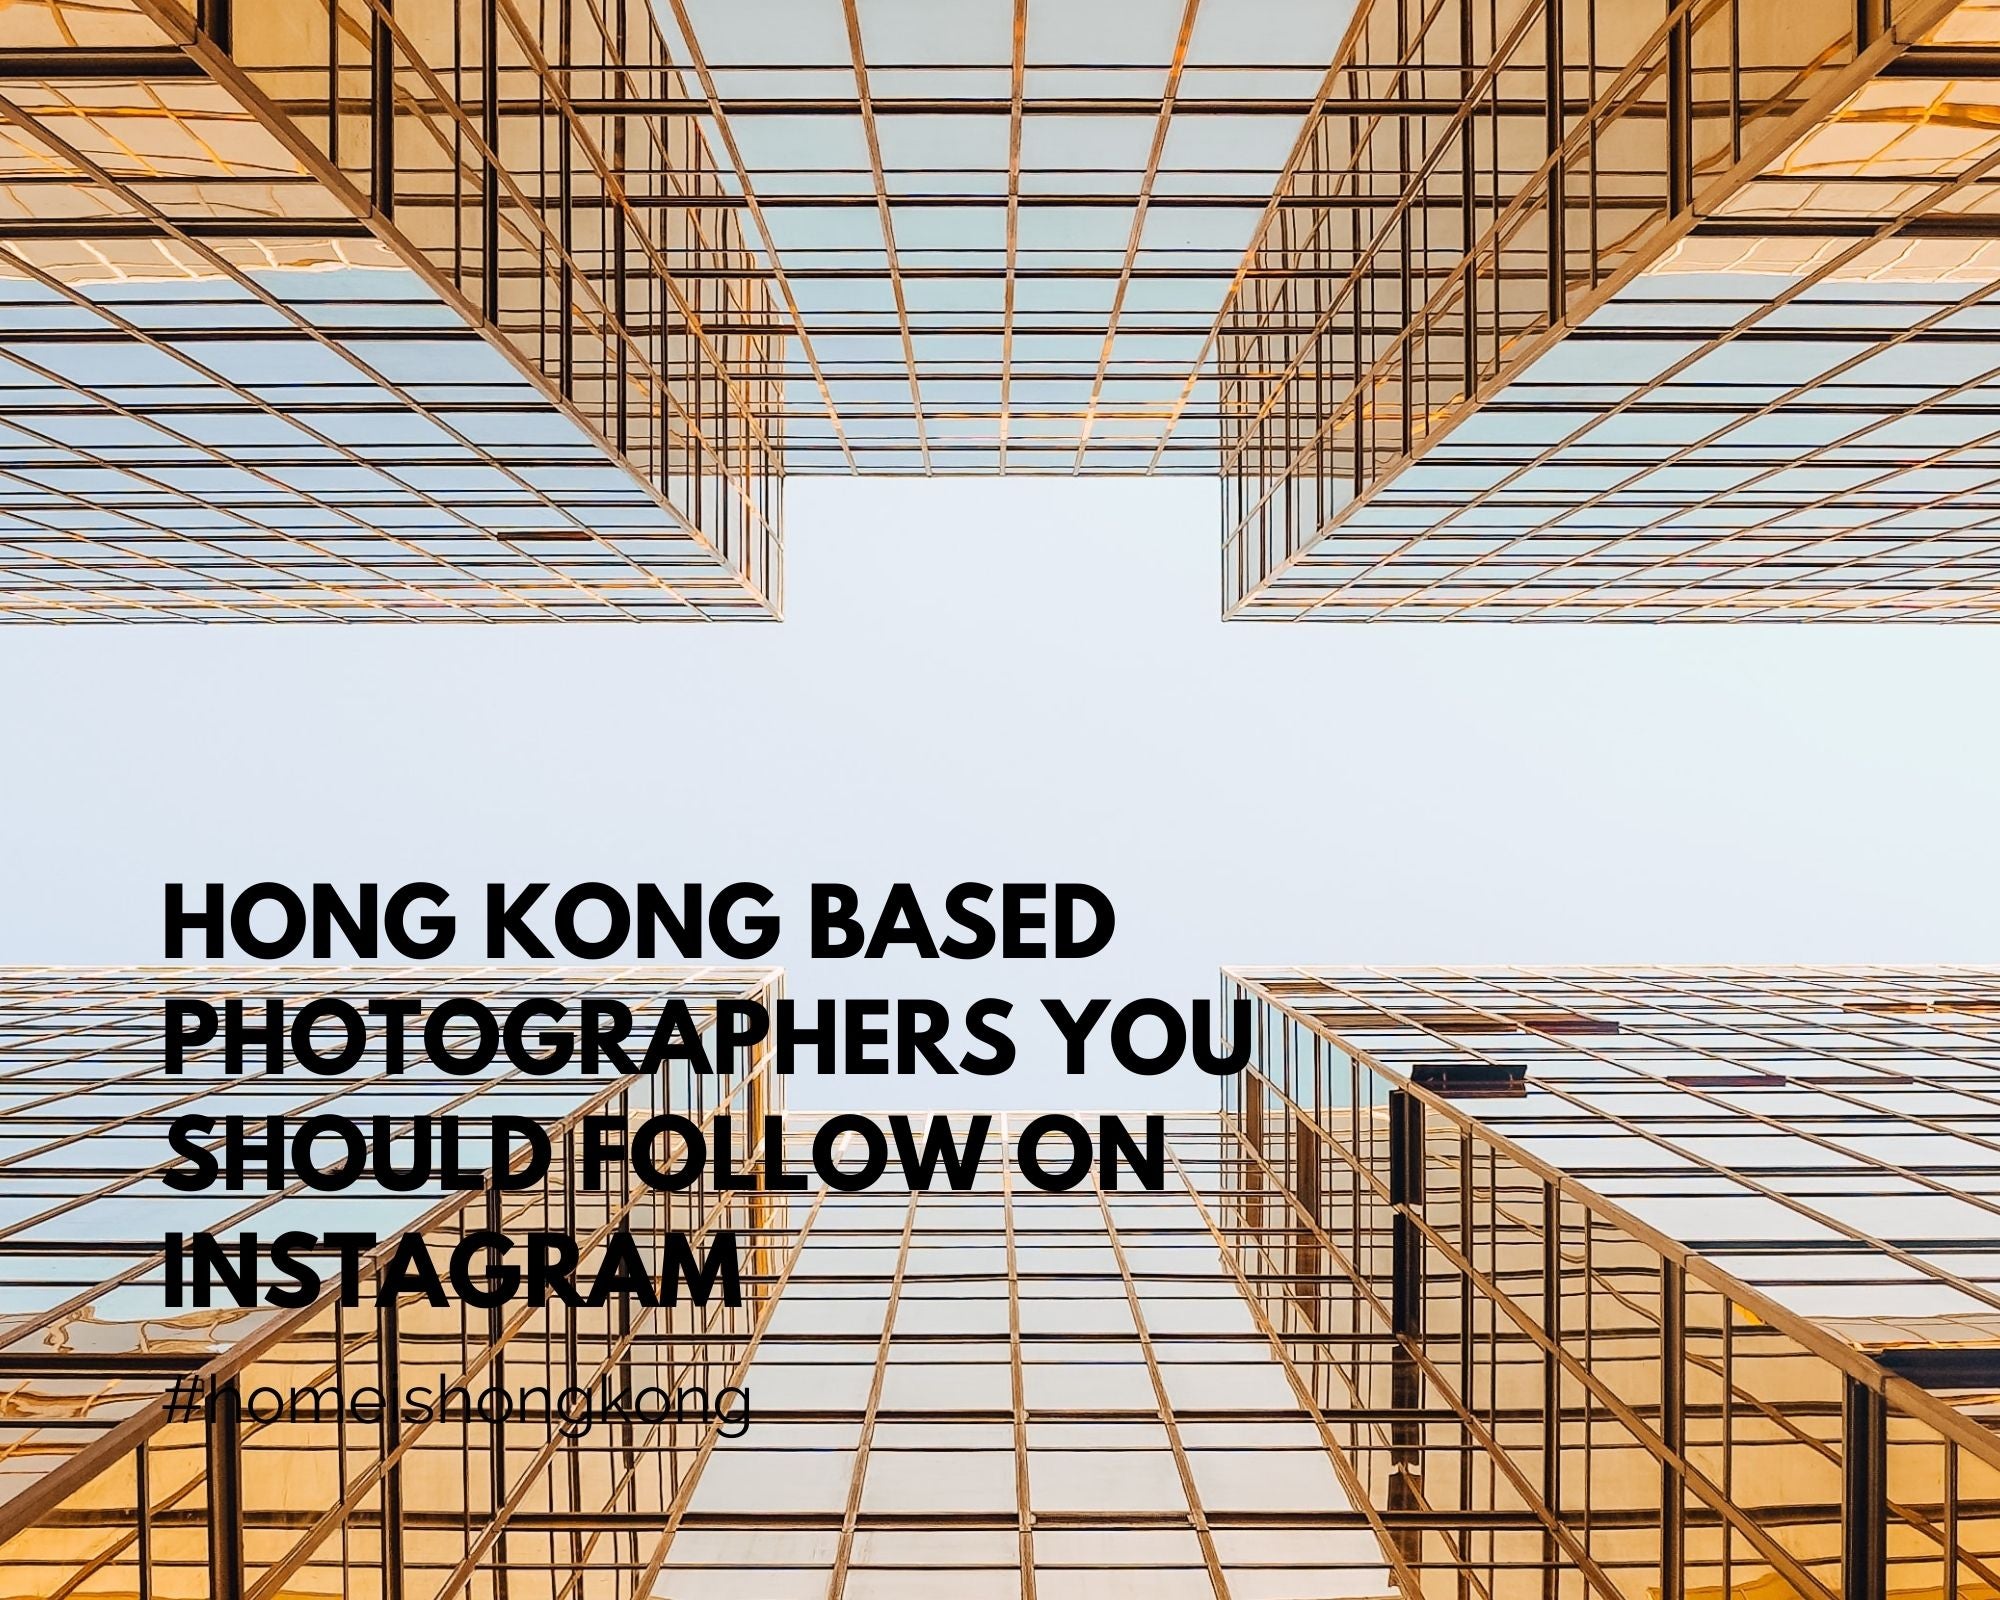 Hong Kong based photographers you should follow on Instagram